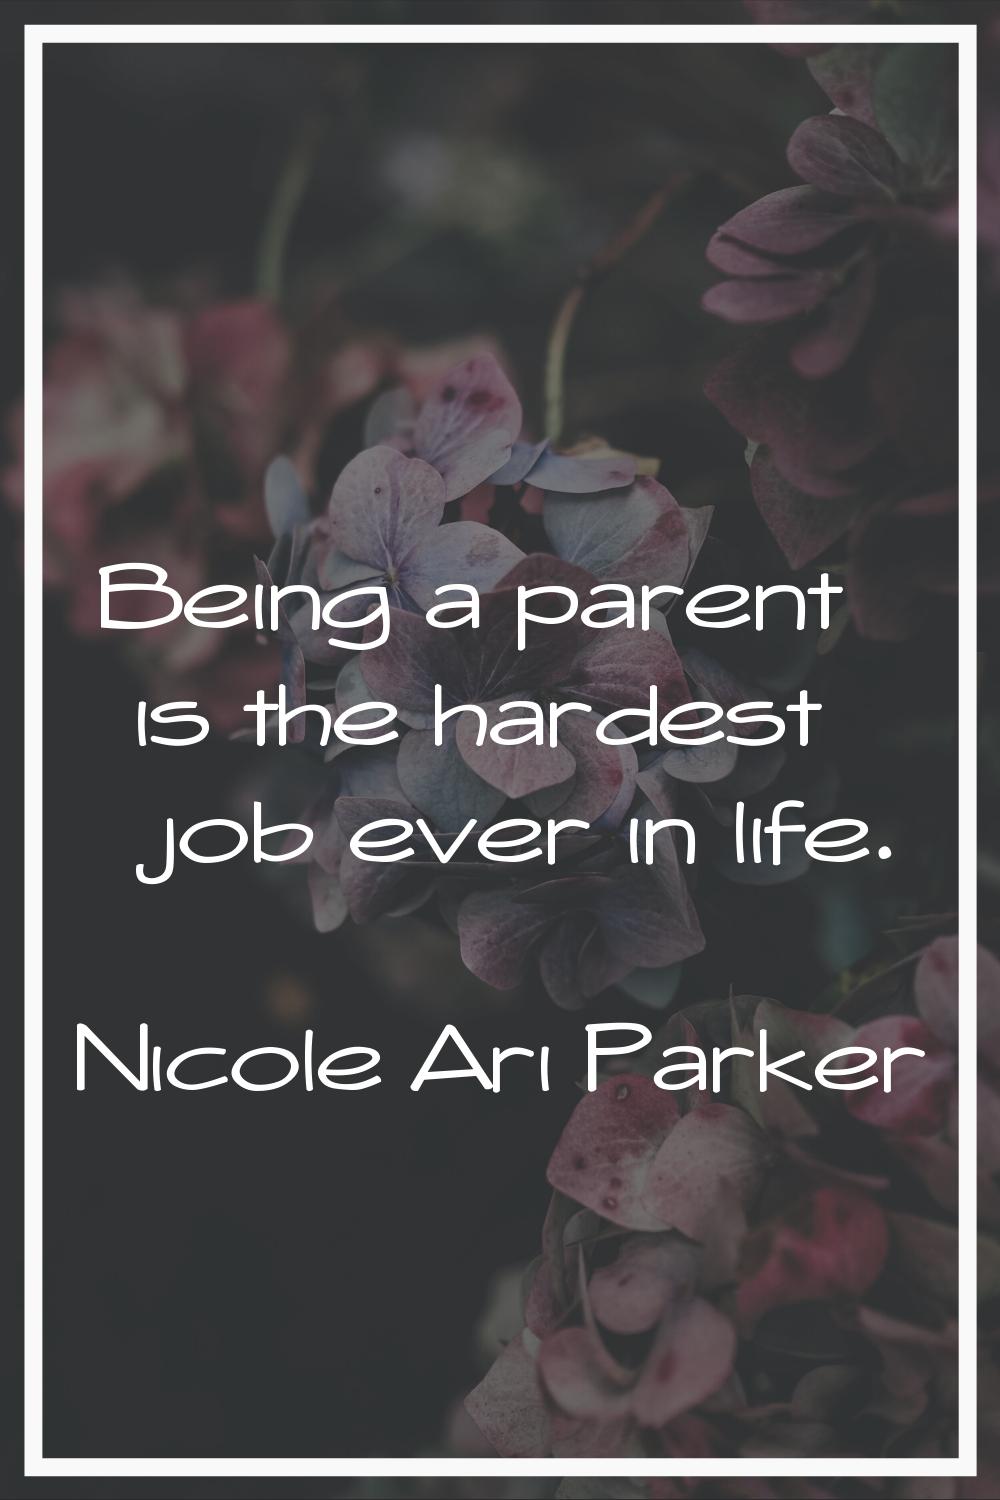 Being a parent is the hardest job ever in life.